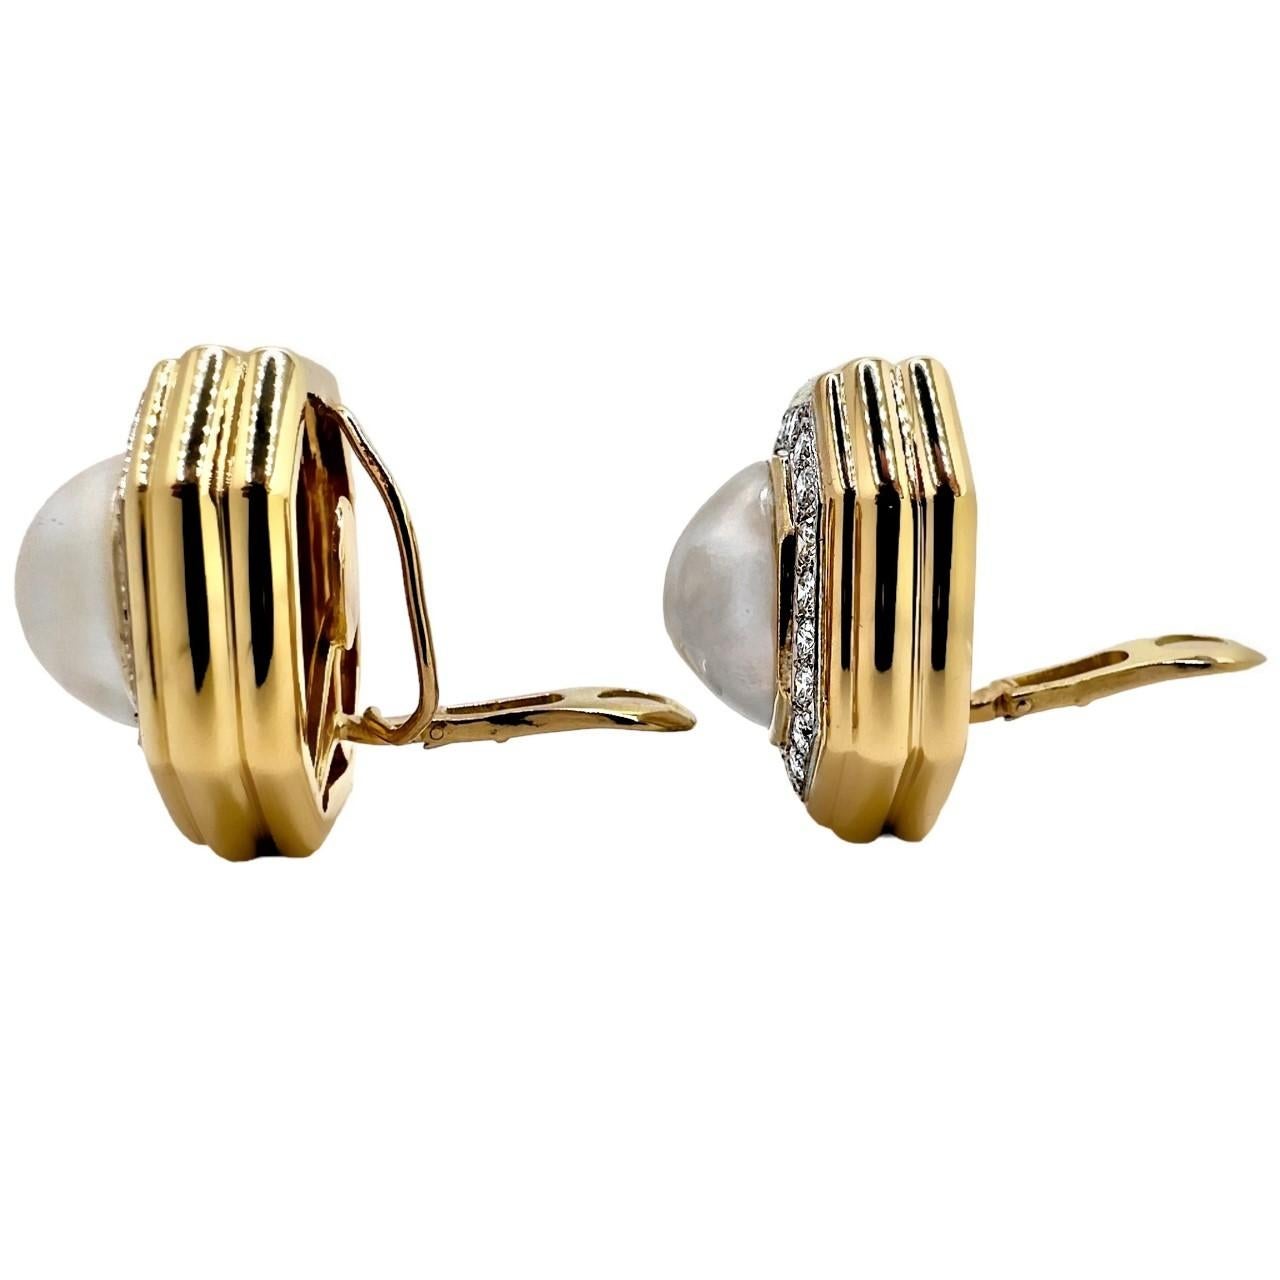 Modern Grand Scale Earrings in Gold, Platinum, Mabe Pearl, & Diamonds by Wander, France For Sale